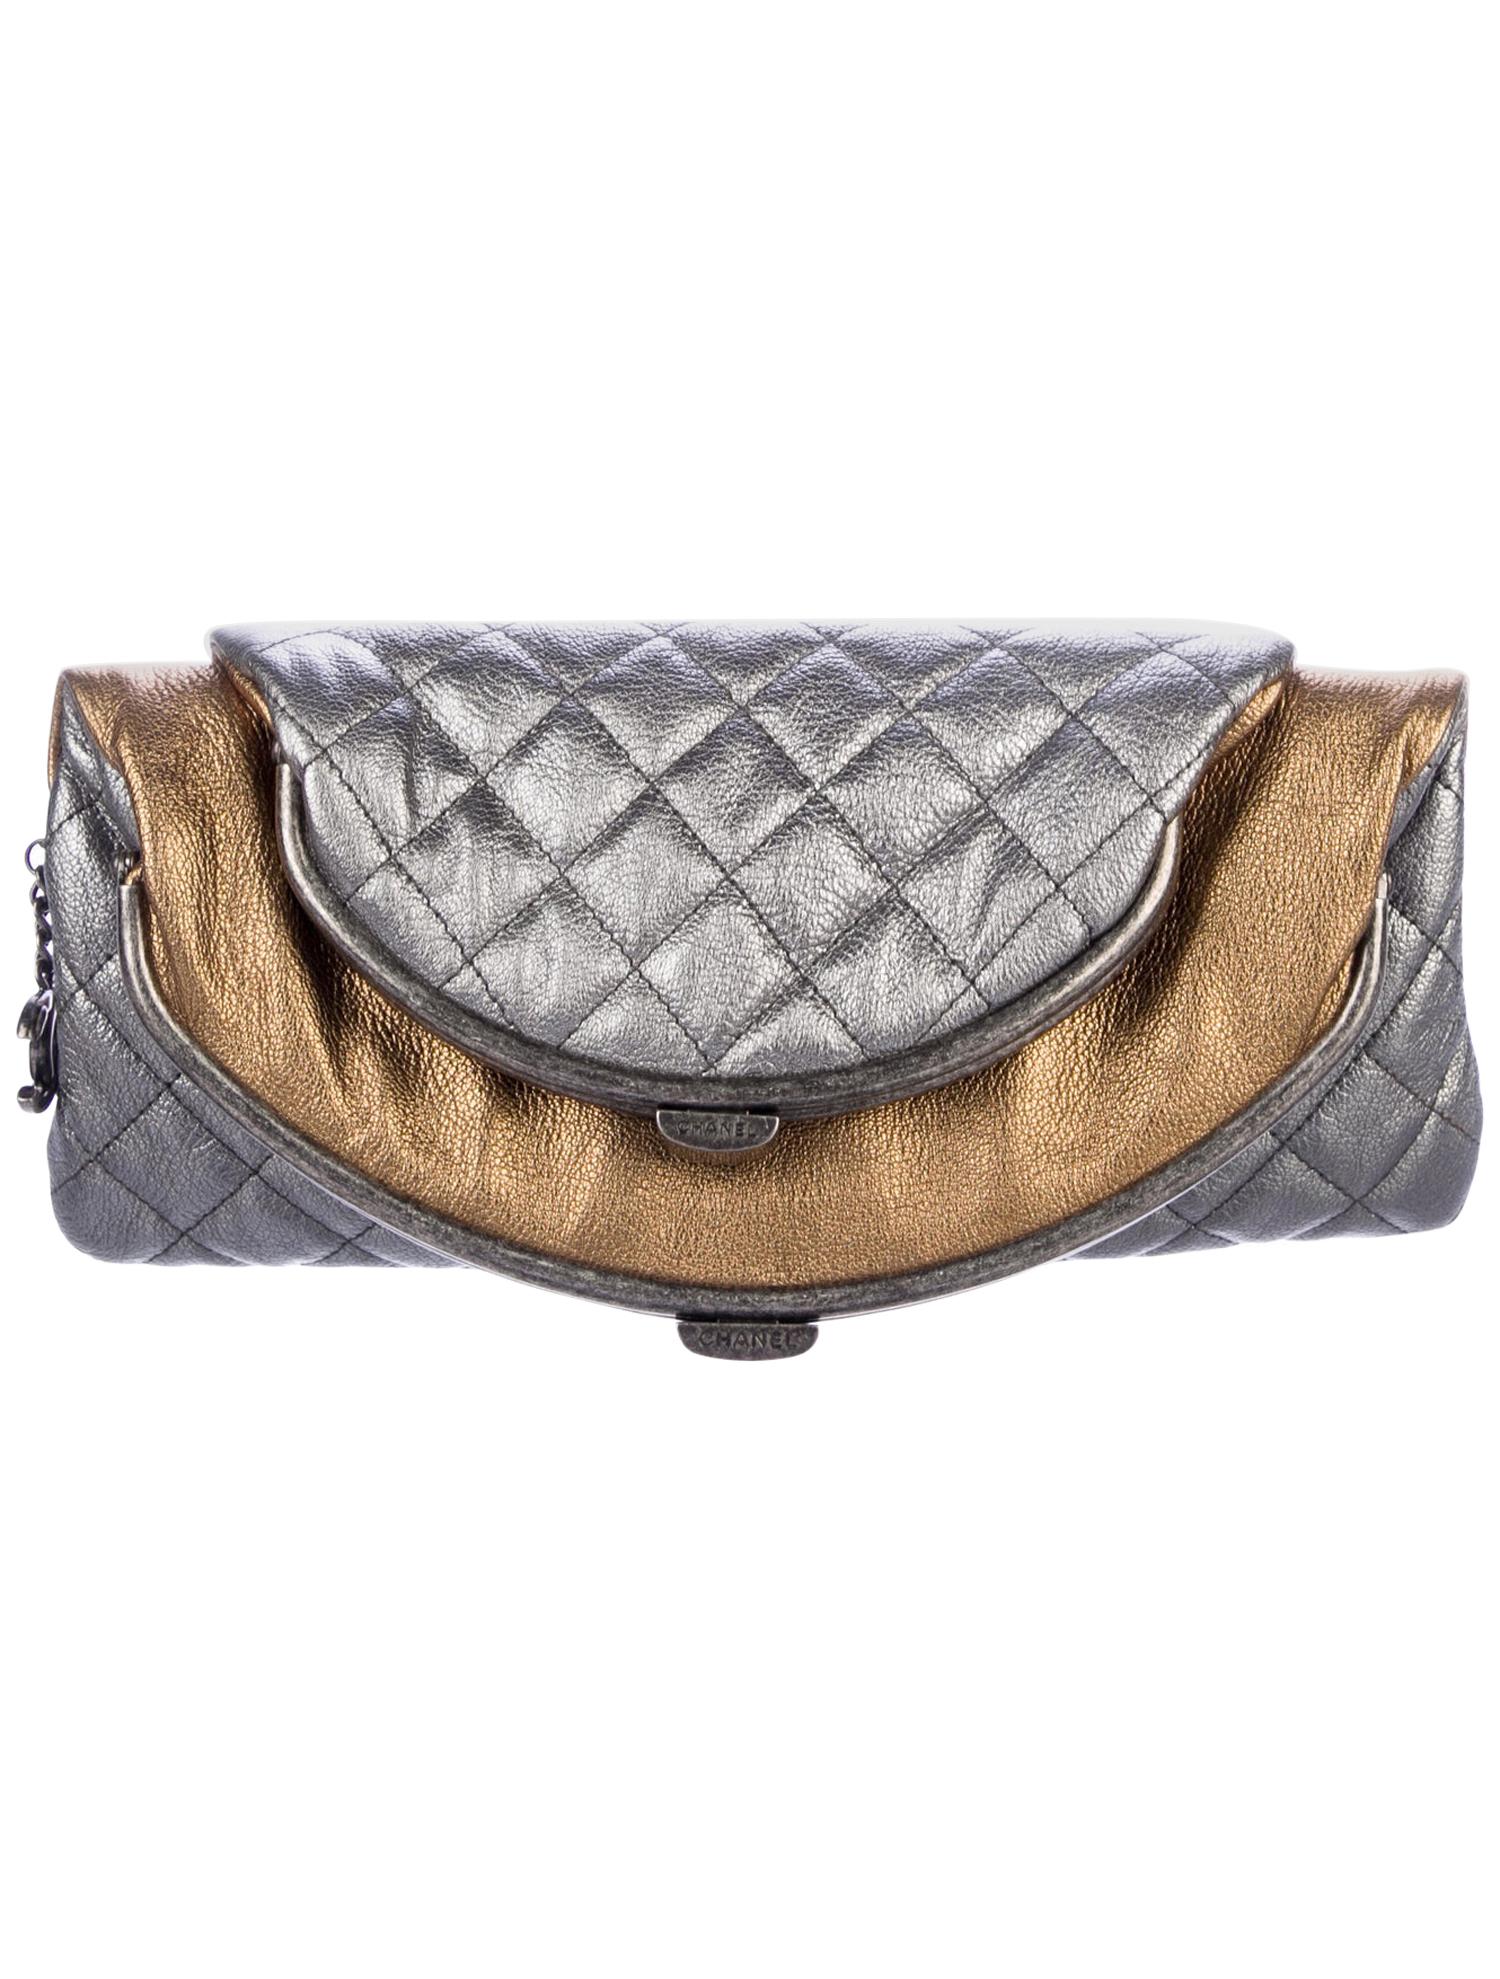 Chanel Metallic Silver Gold Leather Bronze Envelope Evening Clutch Bag For  Sale at 1stDibs